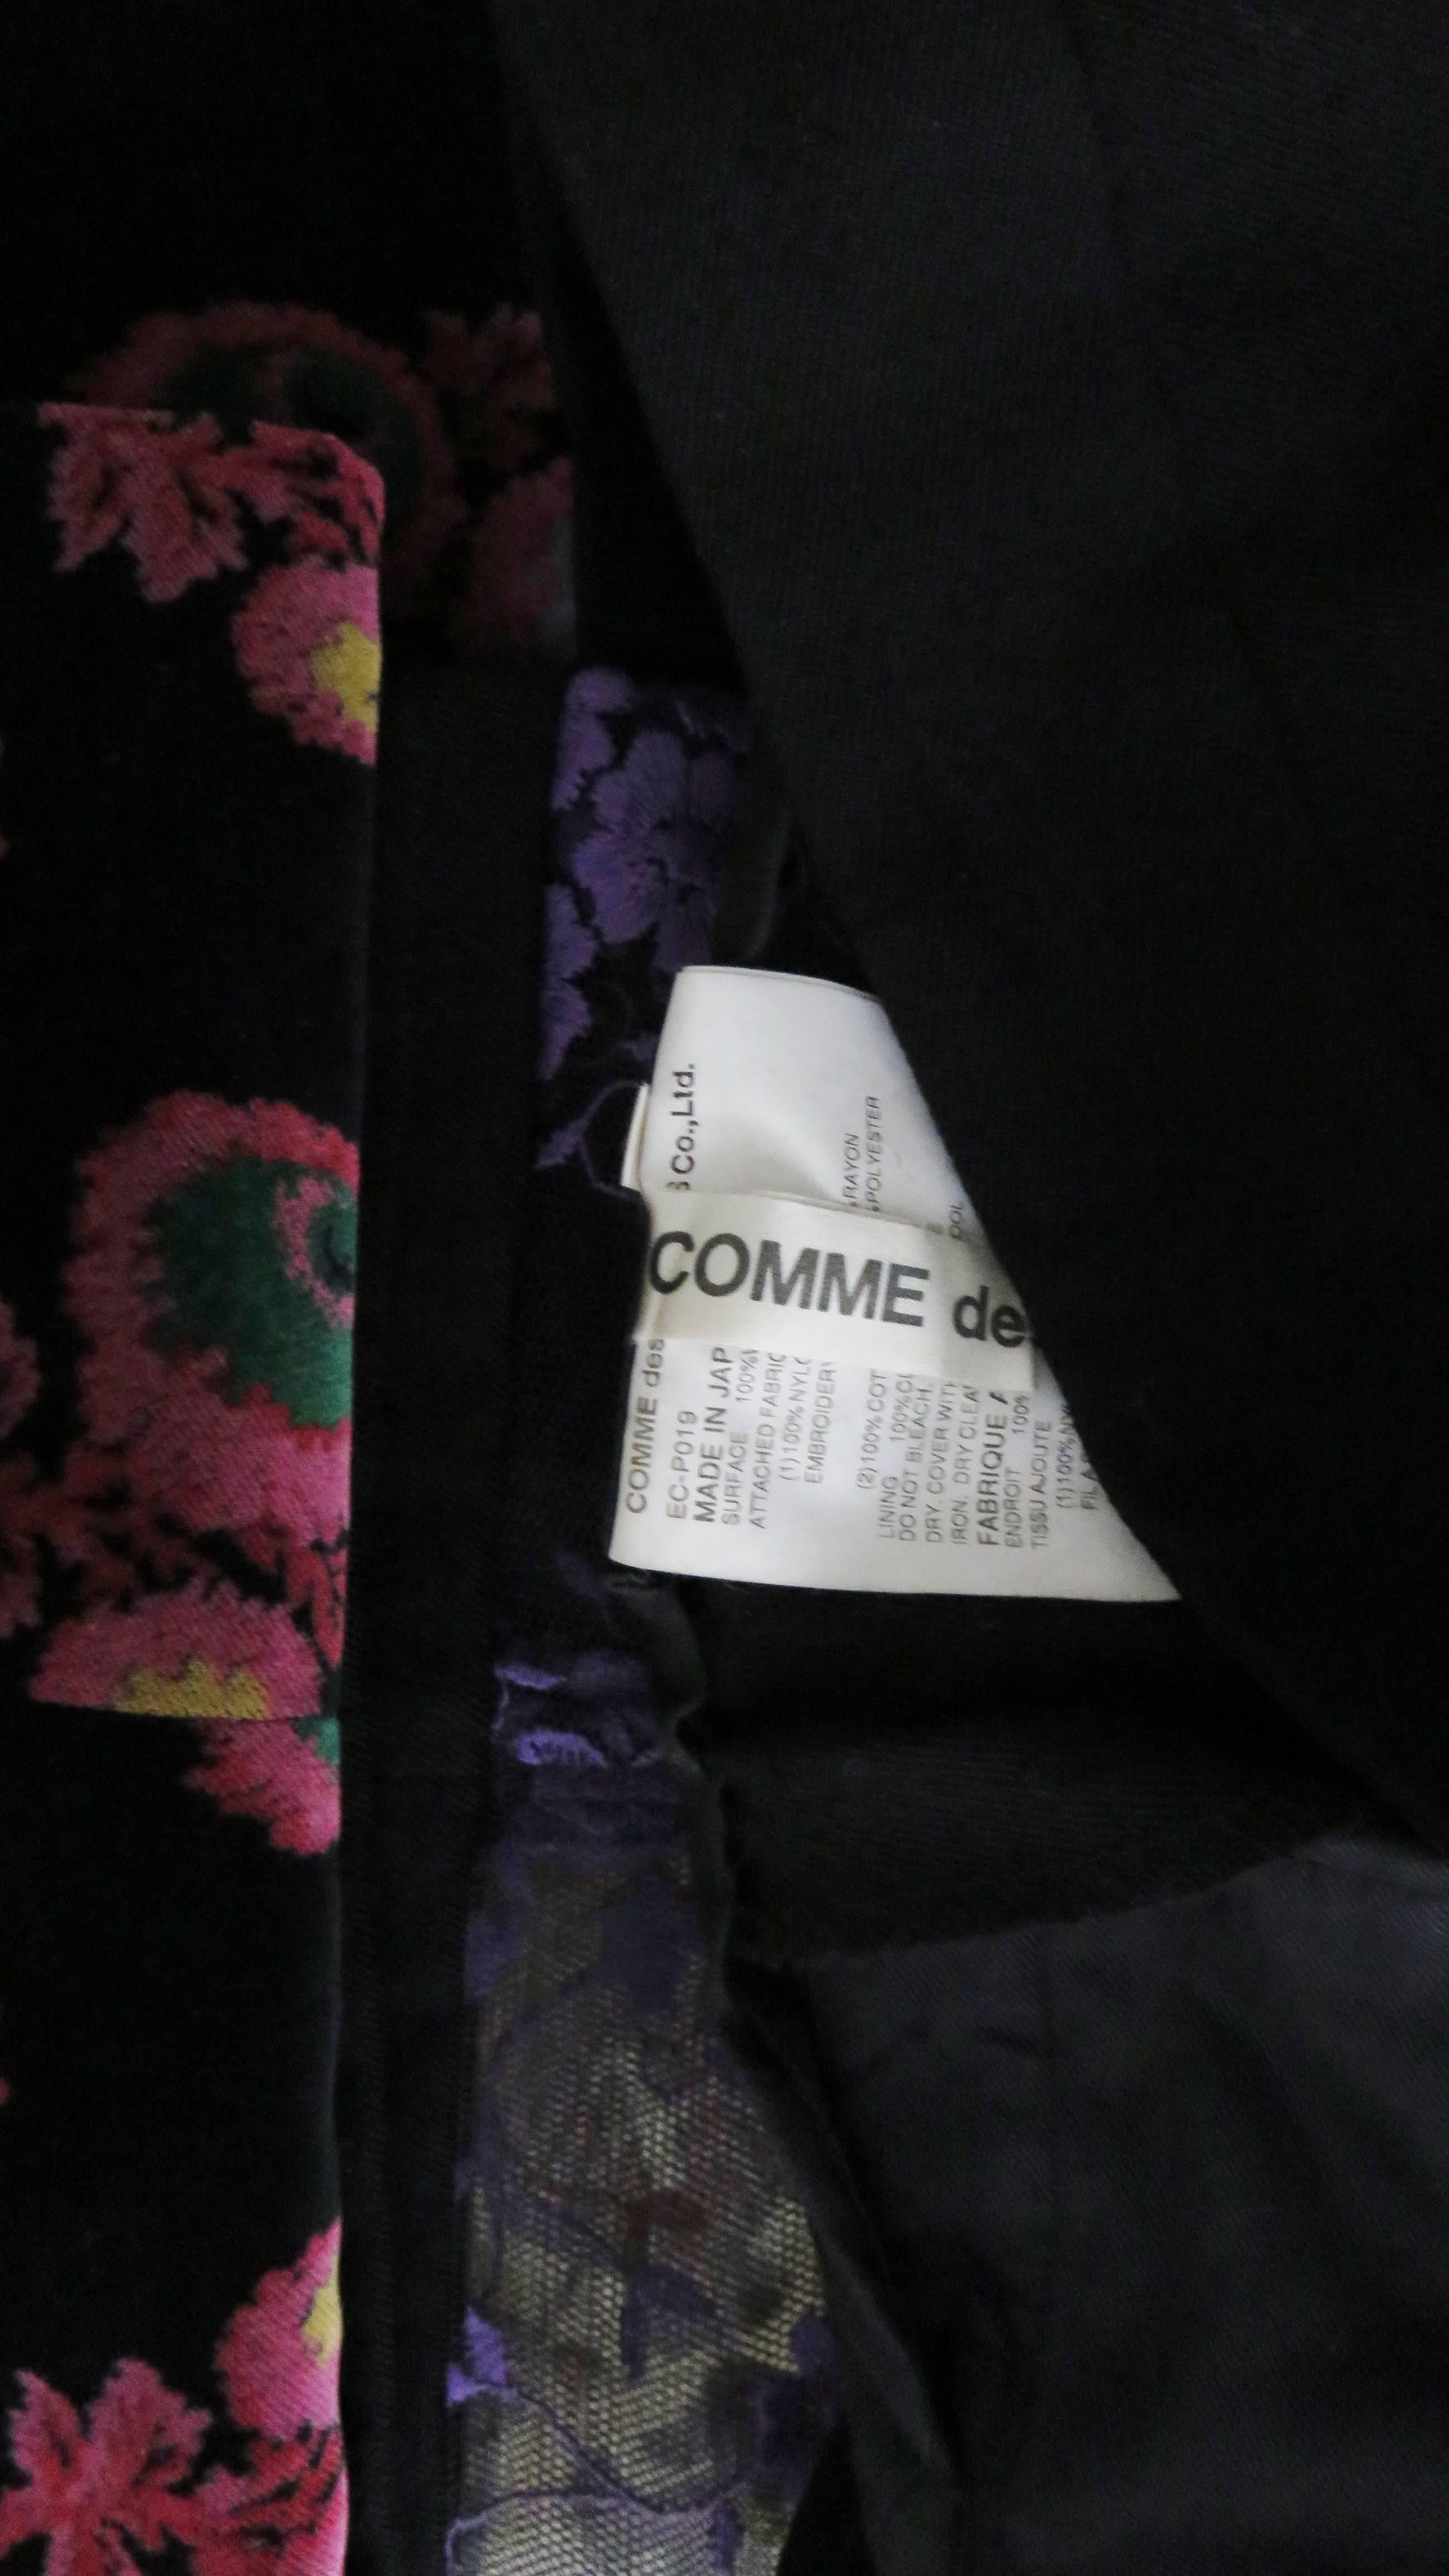 2001 AD Comme des Garcons Pants with Velvet and Lace Panels 9